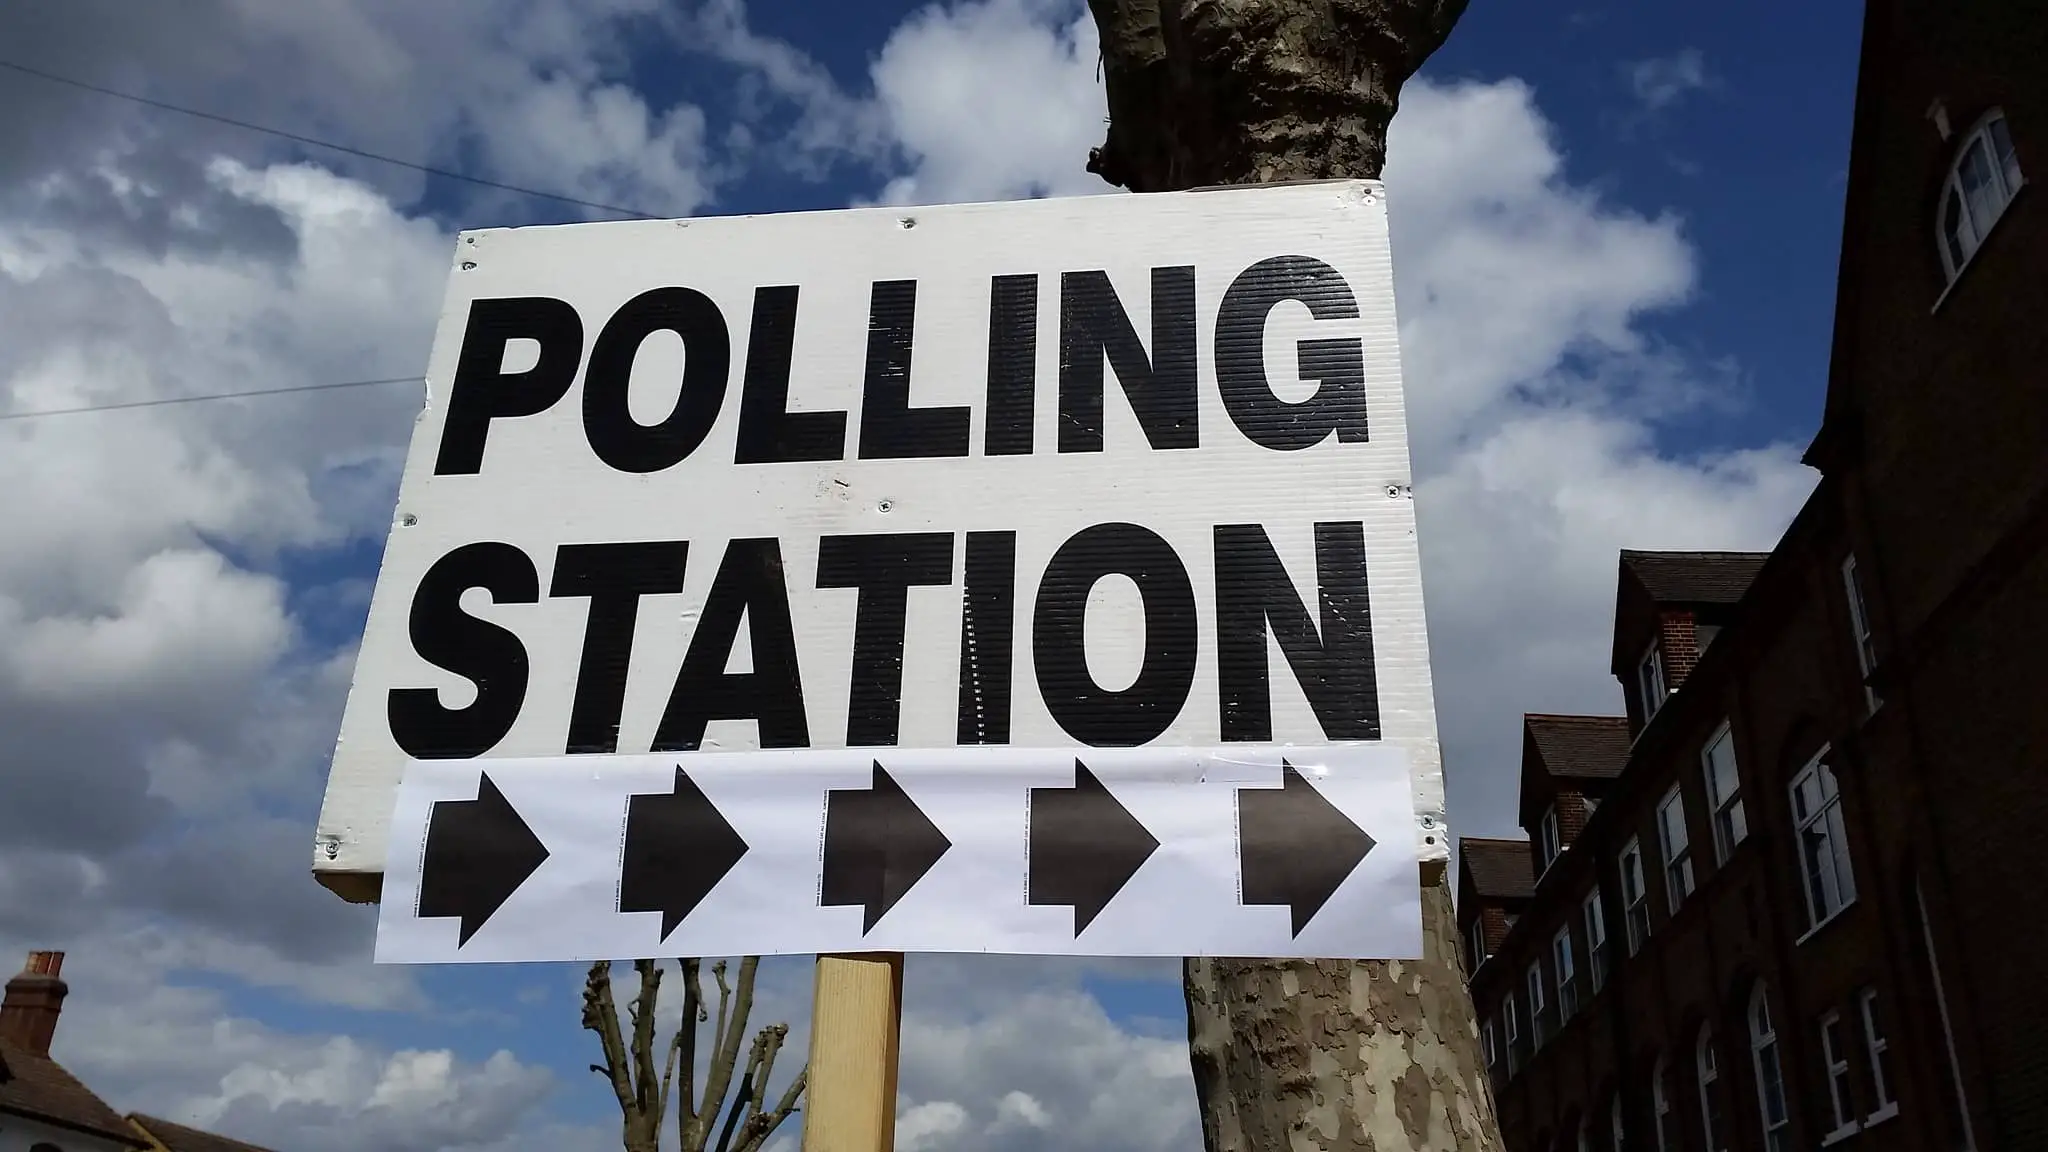 Polling station sign with blue sky in background